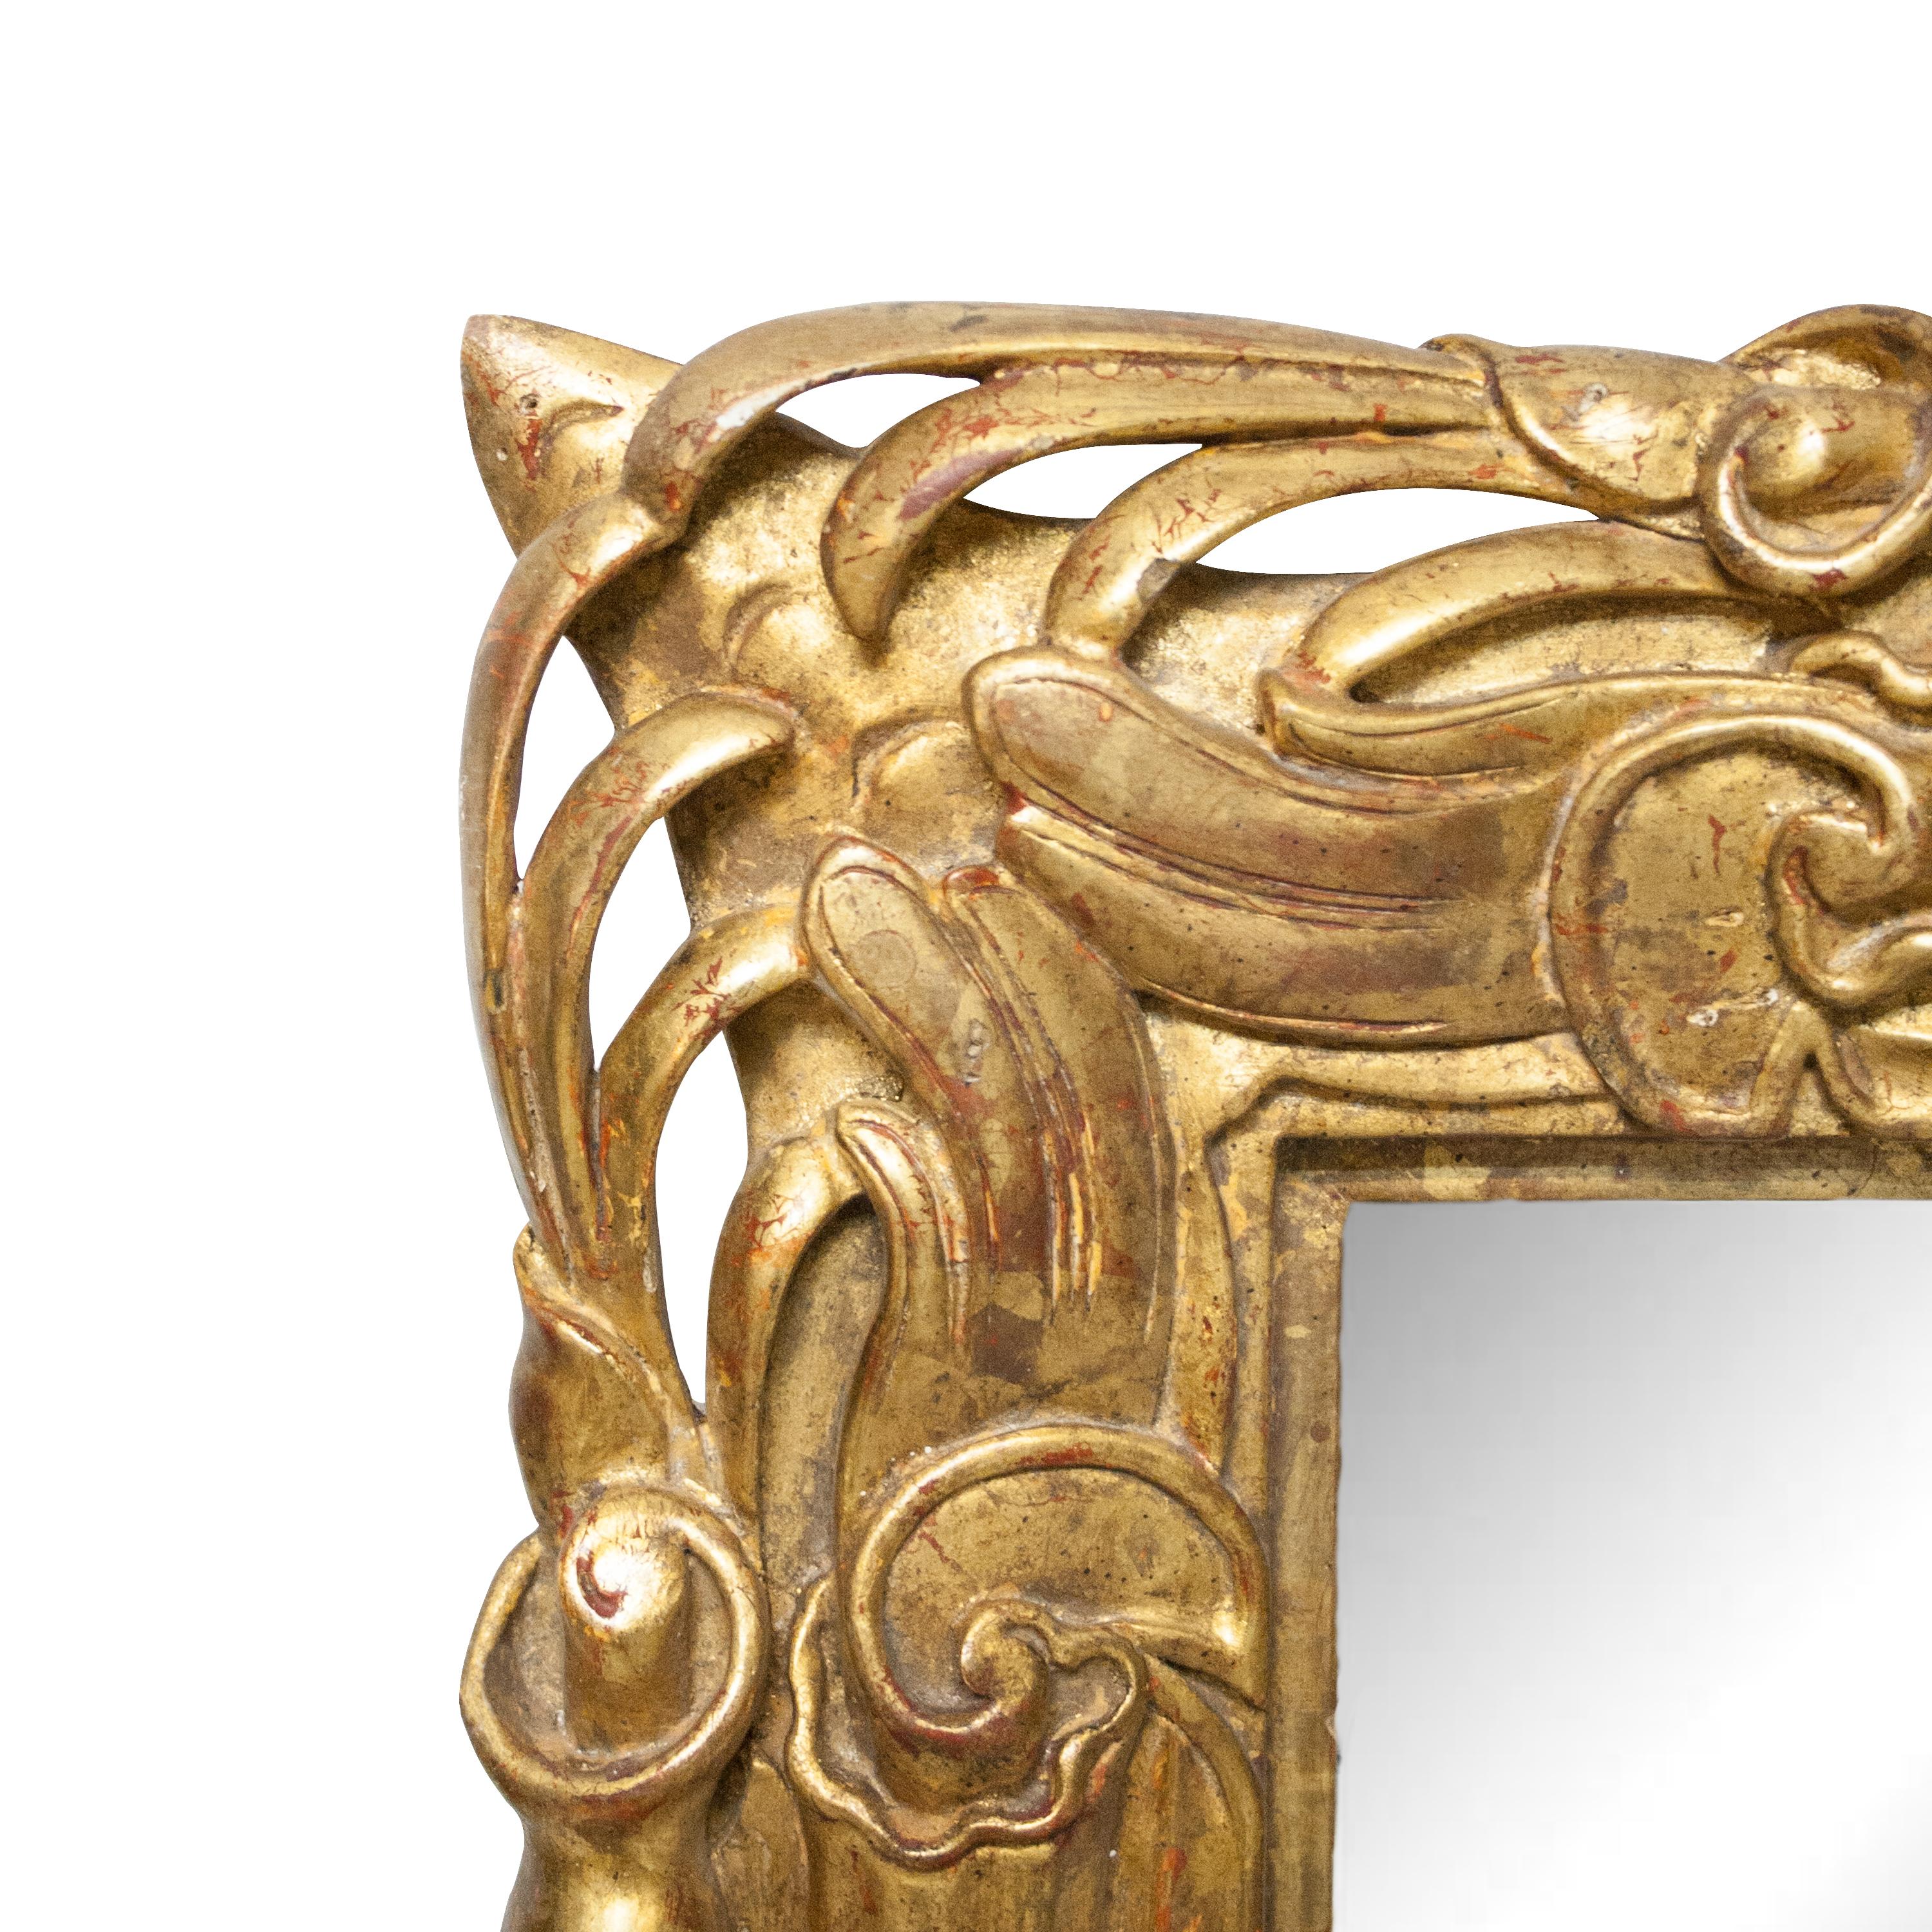 Art Nouveau style handcrafted mirror. Rectangular hand carved wooden structure with gold foil finish. Spain, 1970.